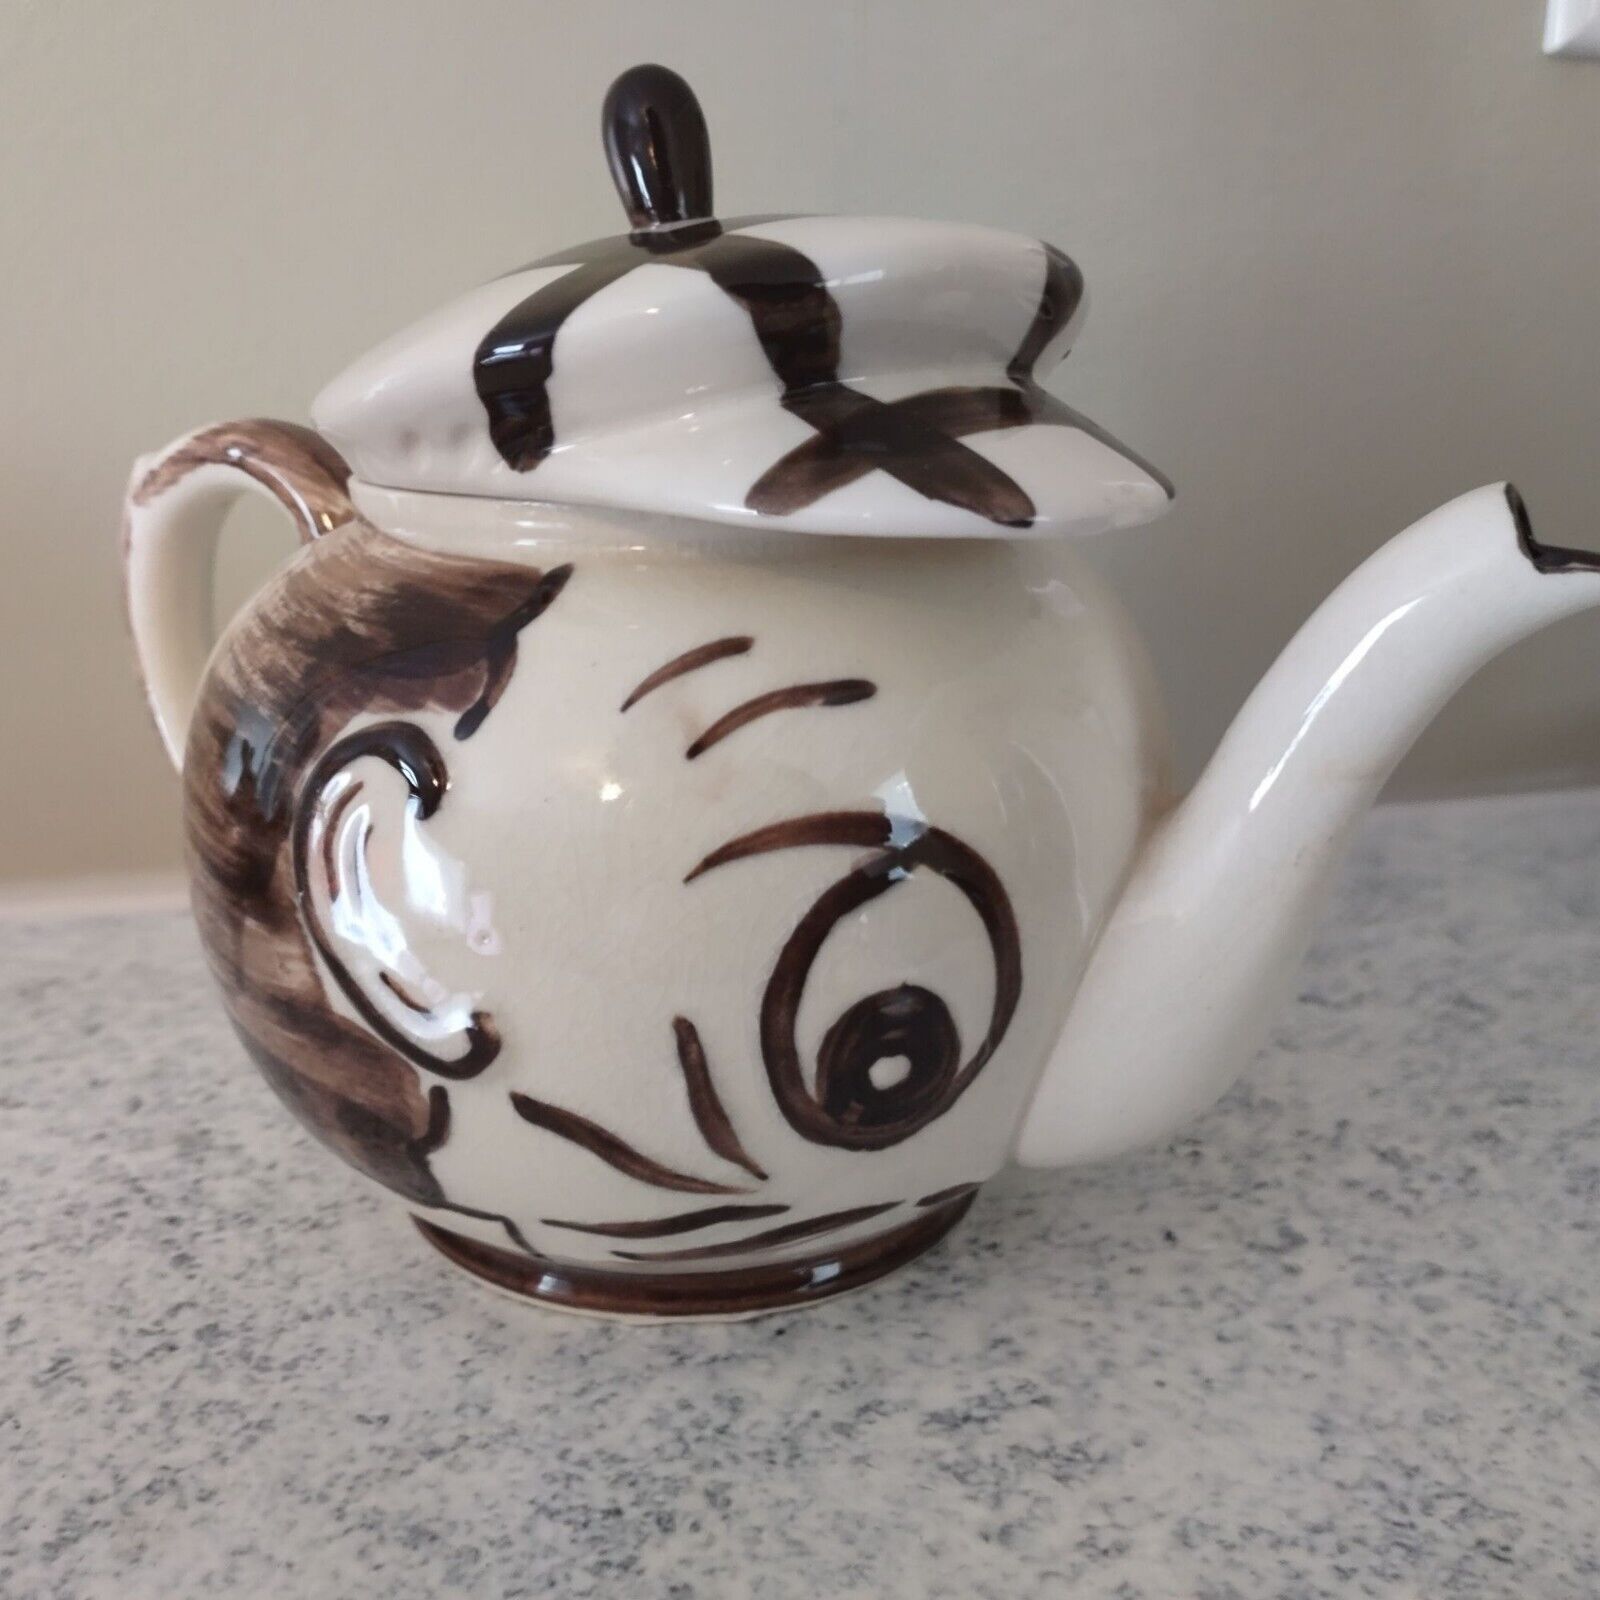 VTG Andy Capp Caddie teapot Japan ? art pottery brown & white 7 inch 50s mcm